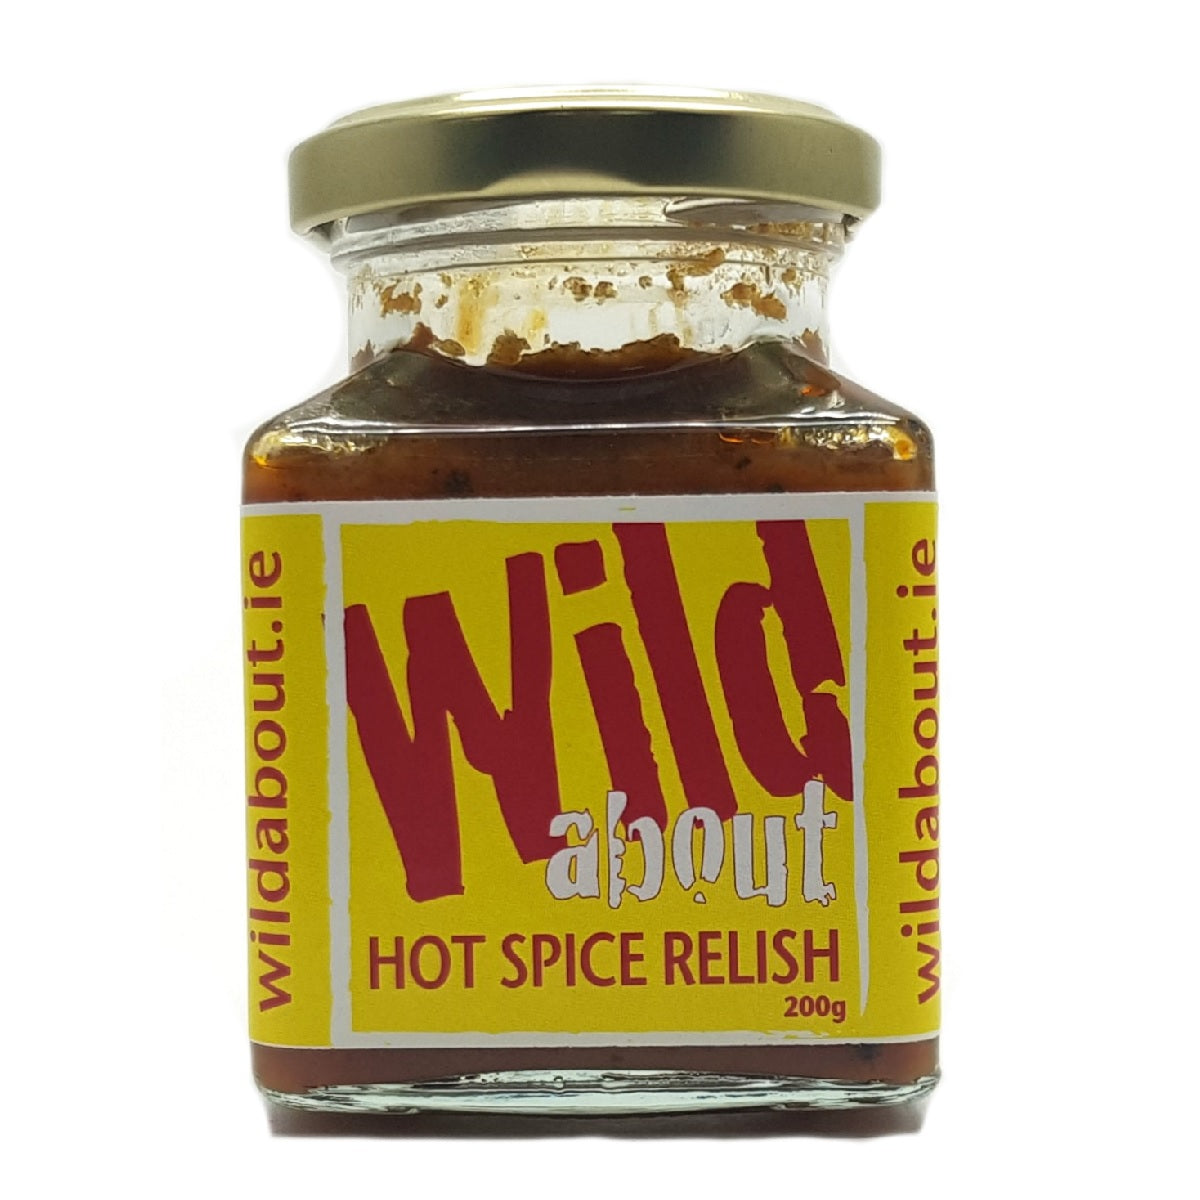 Wild About Hot Spice Relish 200g